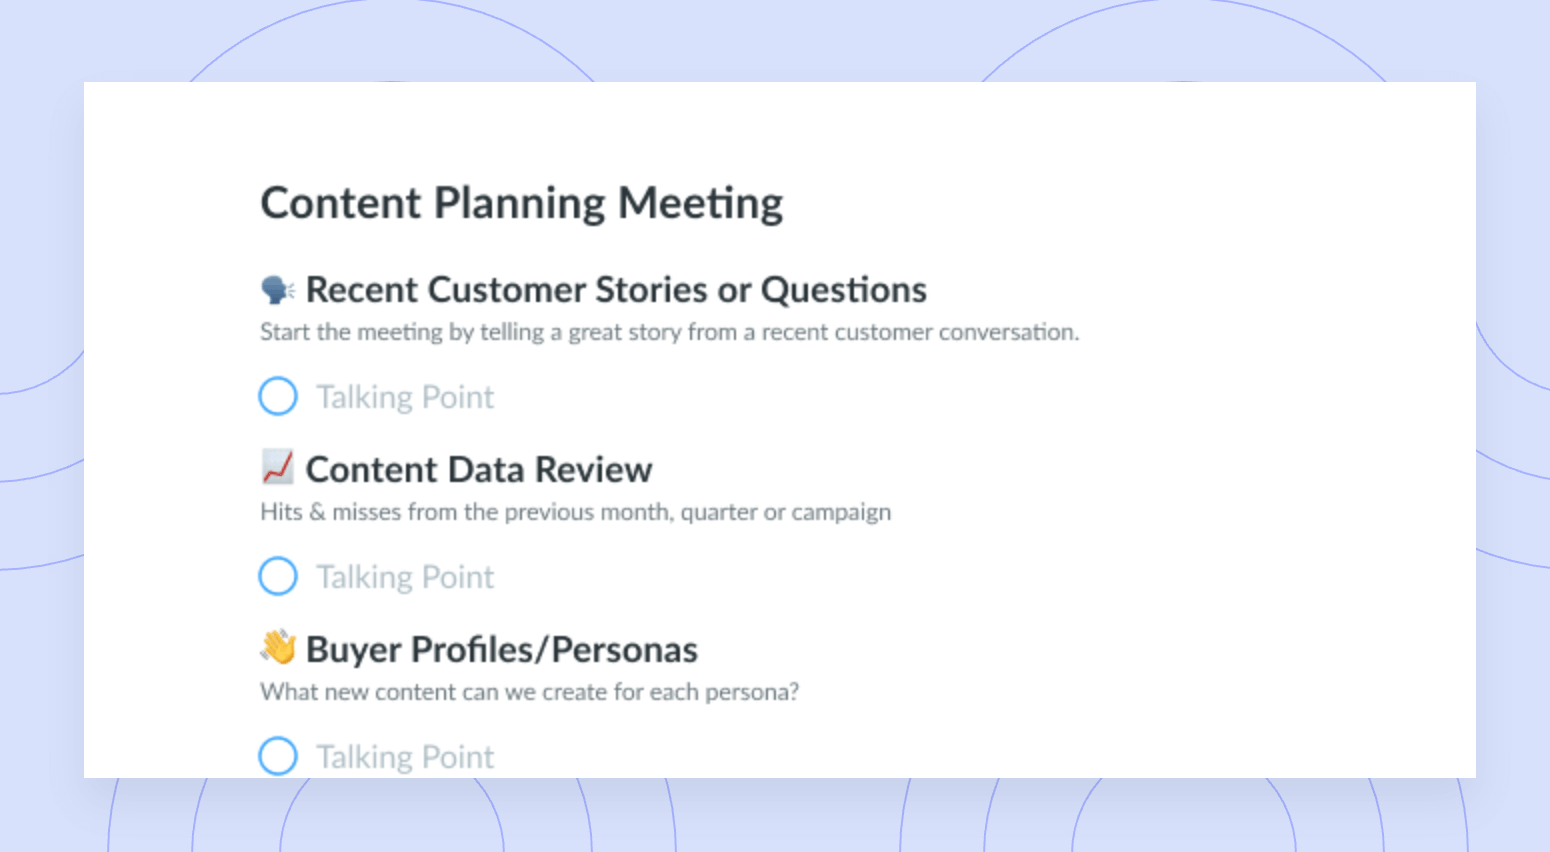 Content Planning Meeting Template